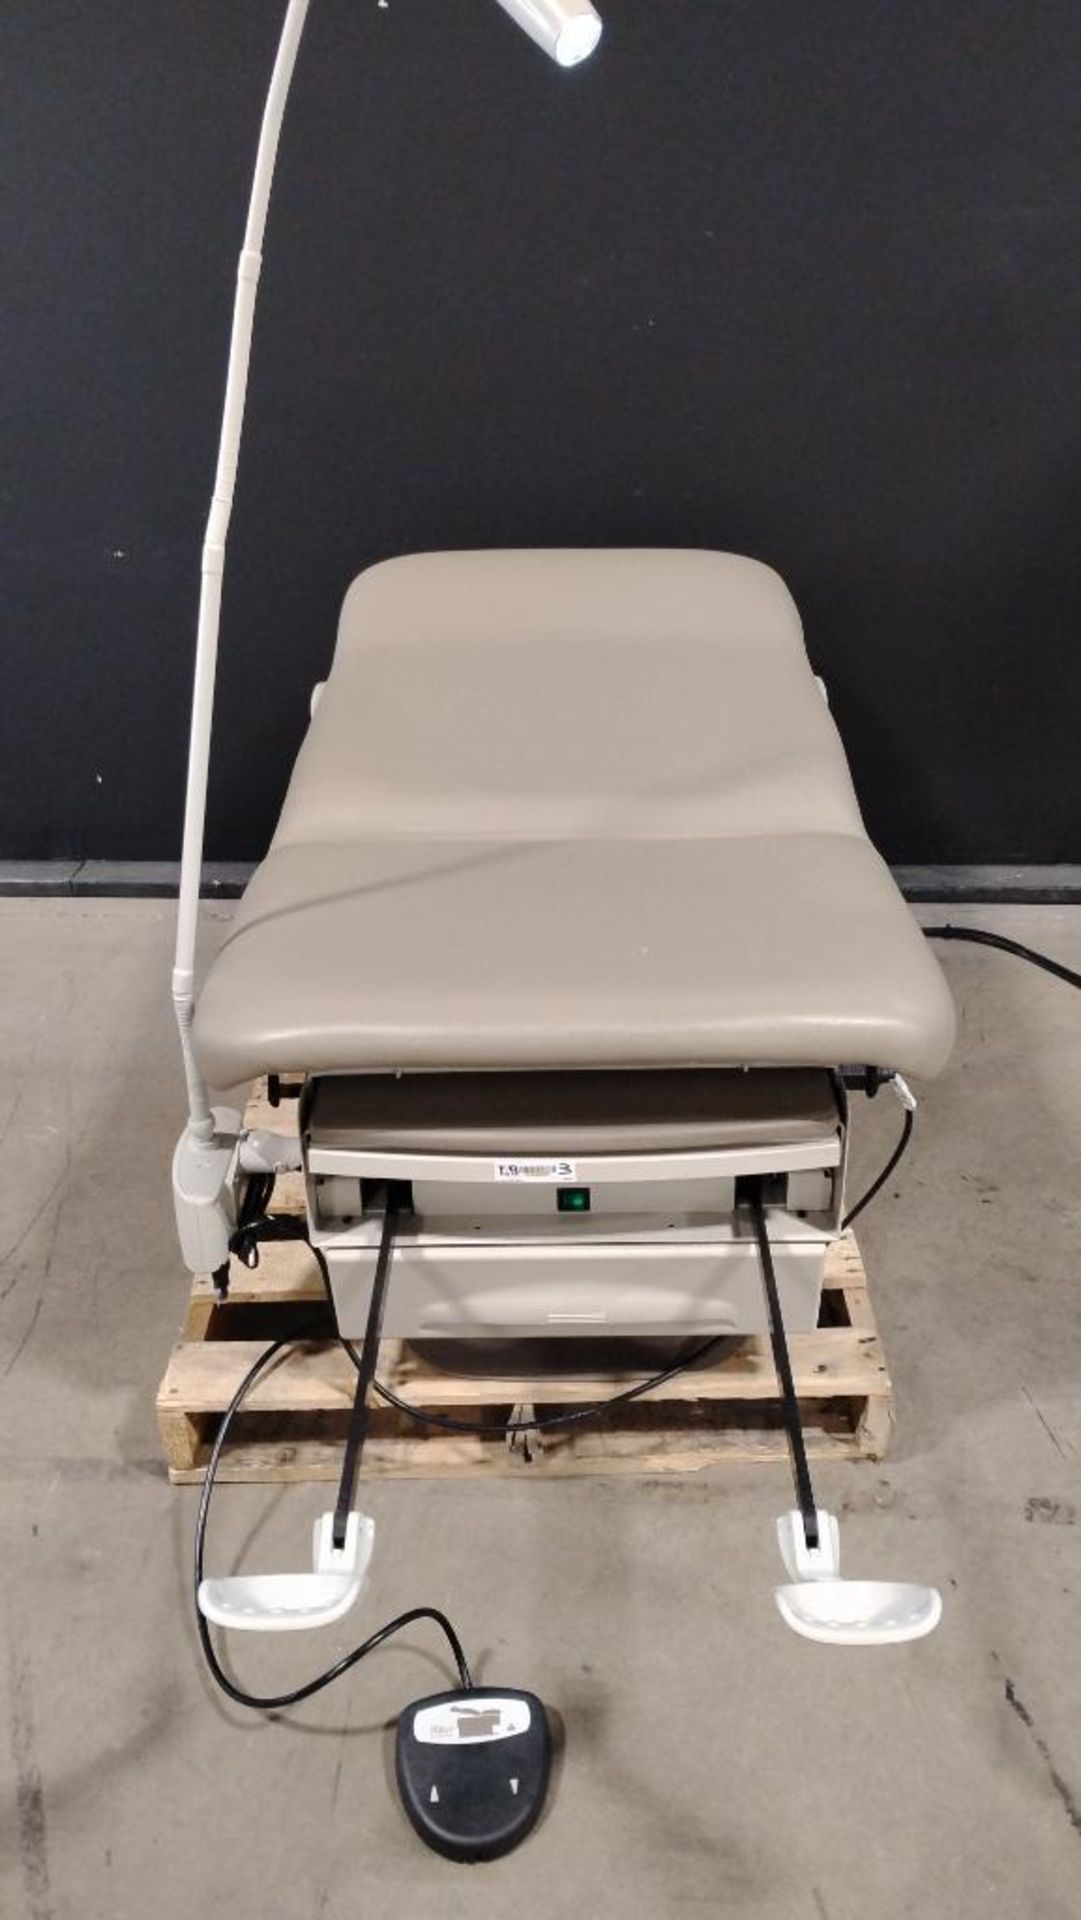 RITTER 222 POWER EXAM TABLE WITH FOOTSWITCH - Image 2 of 5